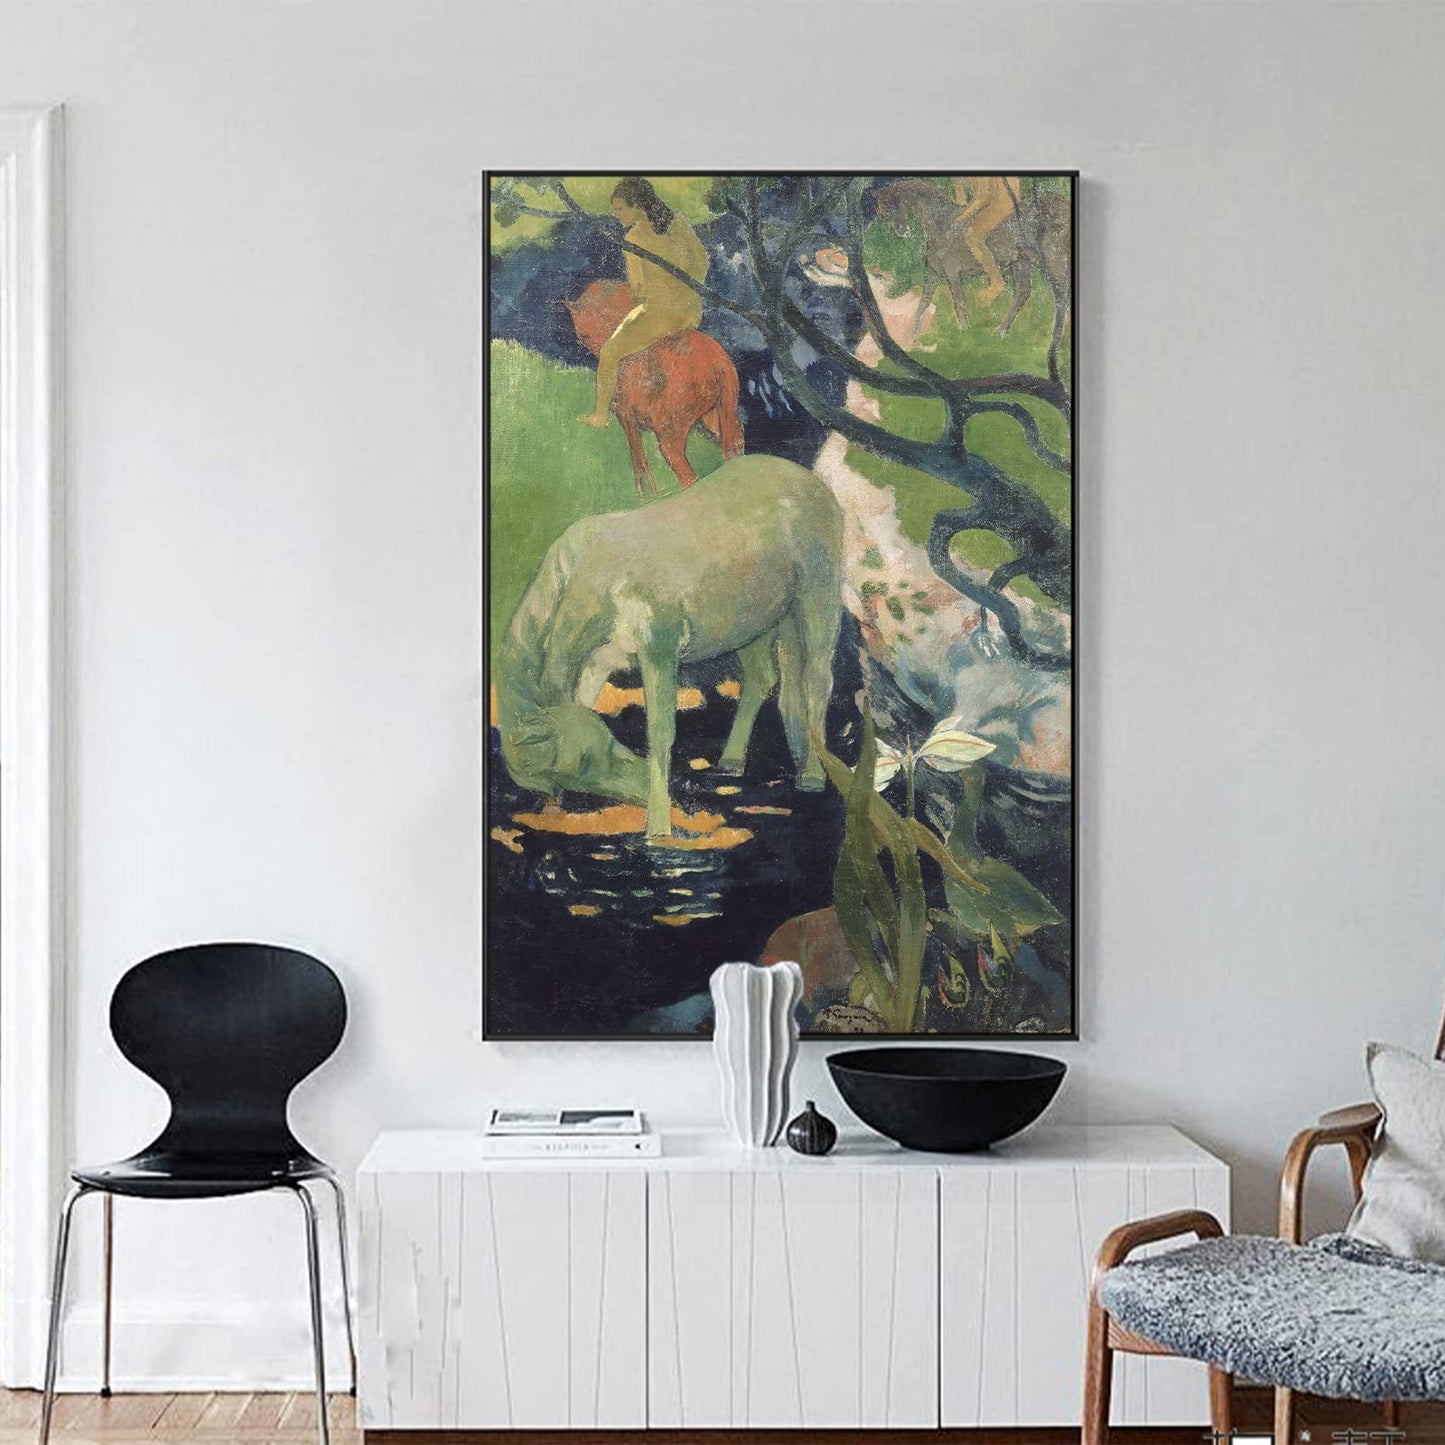 ZZPT Paul Gauguin Canvas Wall Art - The White Horse Print Poster - Famous Artist Fine Art Paintings Reproduction for Bedroom Office Wall Decor Unframed